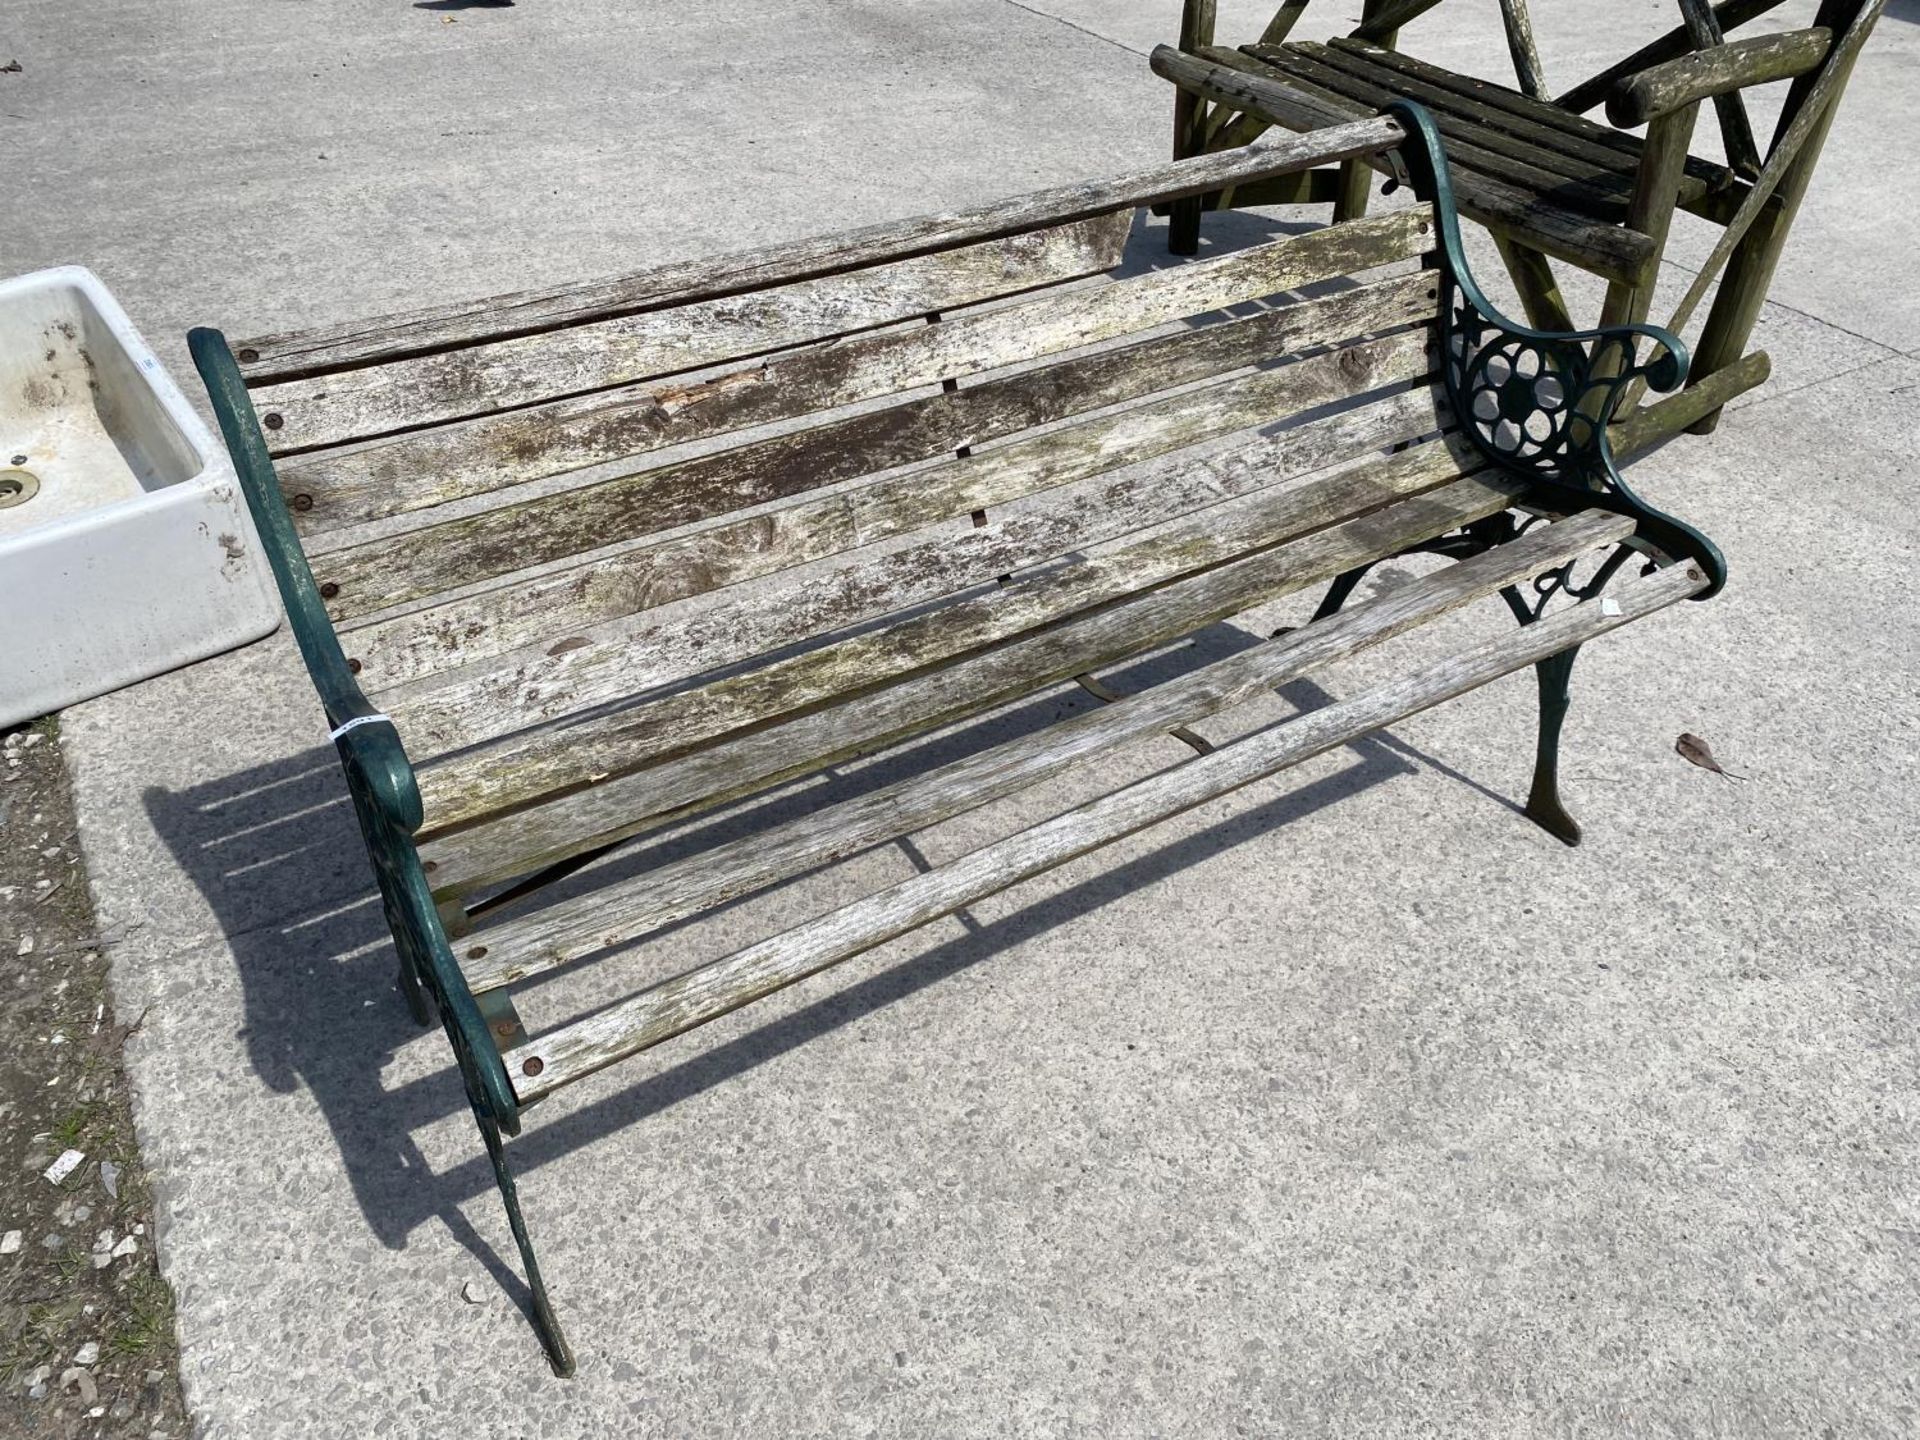 A WOODEN SLATTED GARDEN BENCH WITH DECORATIVE CAST ENDS